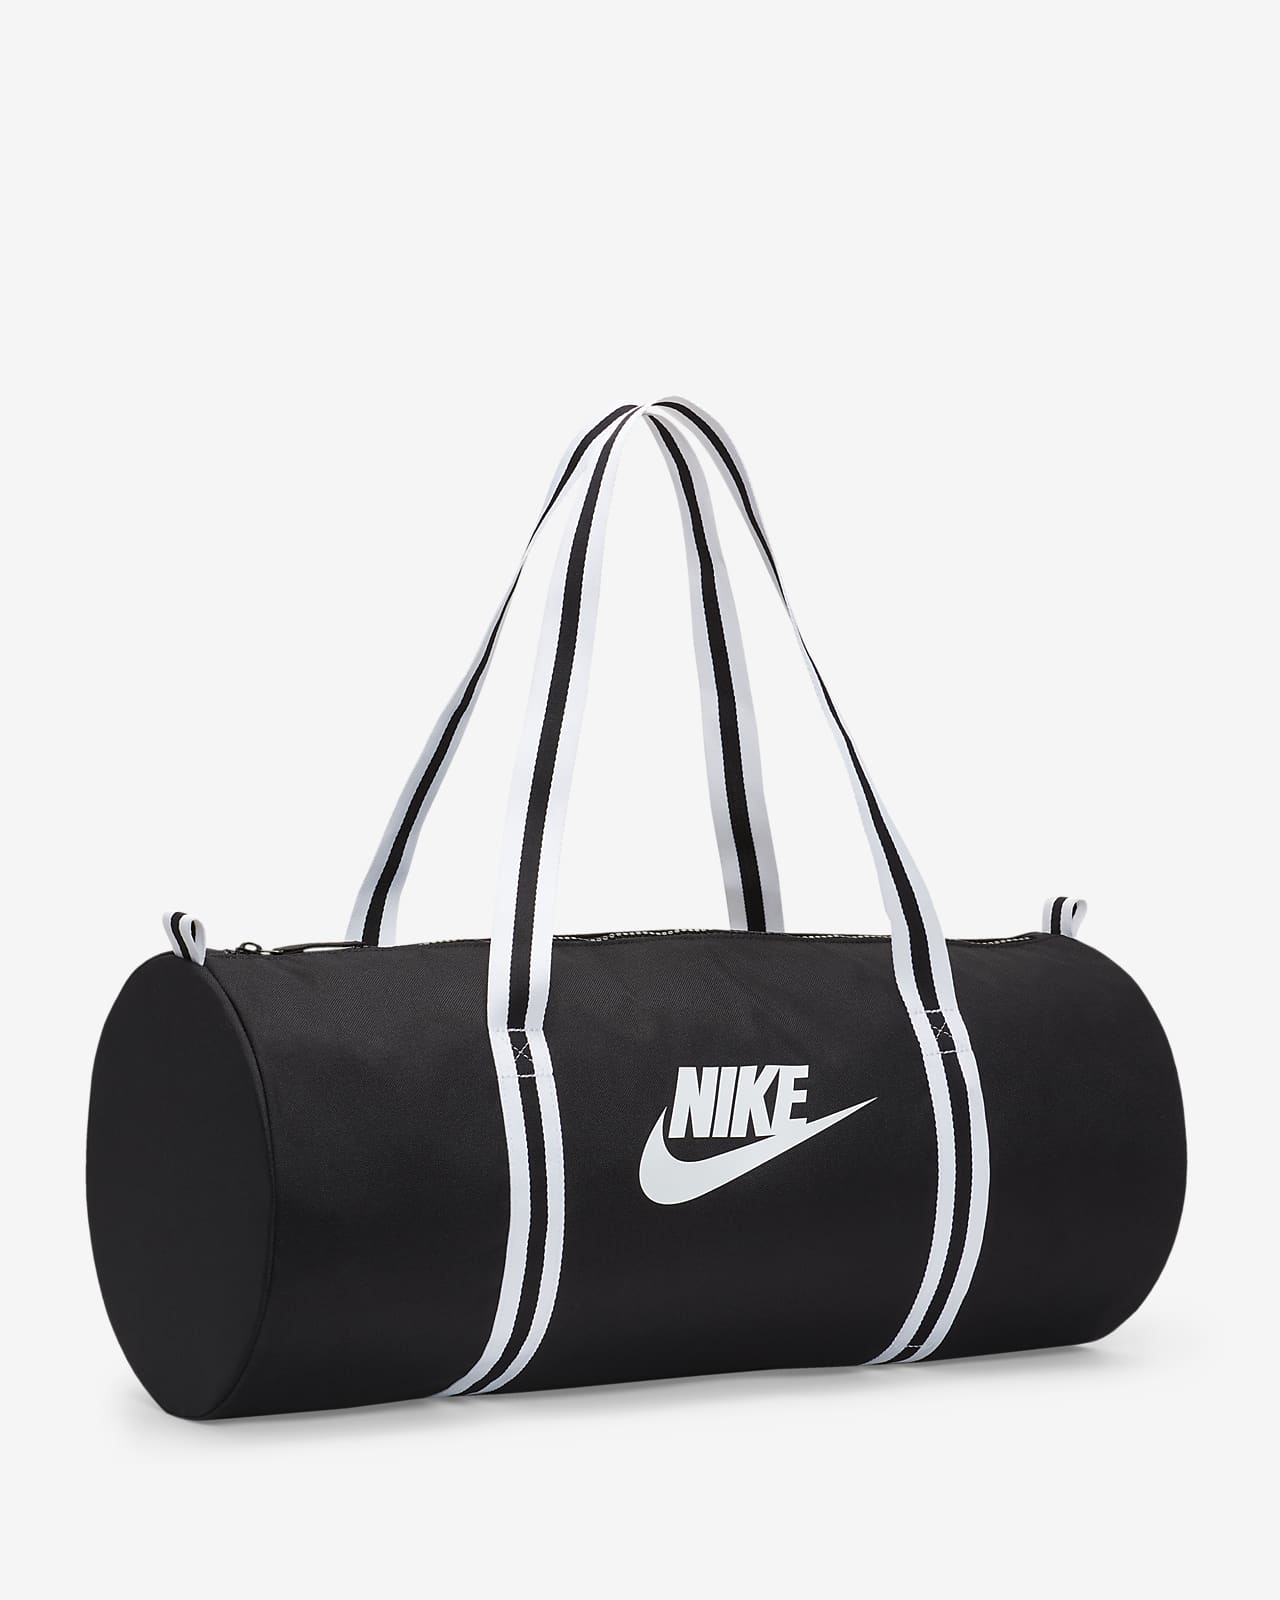 7 Best Gym Bags On The Market of 2023 (Sept Update) | BarBend